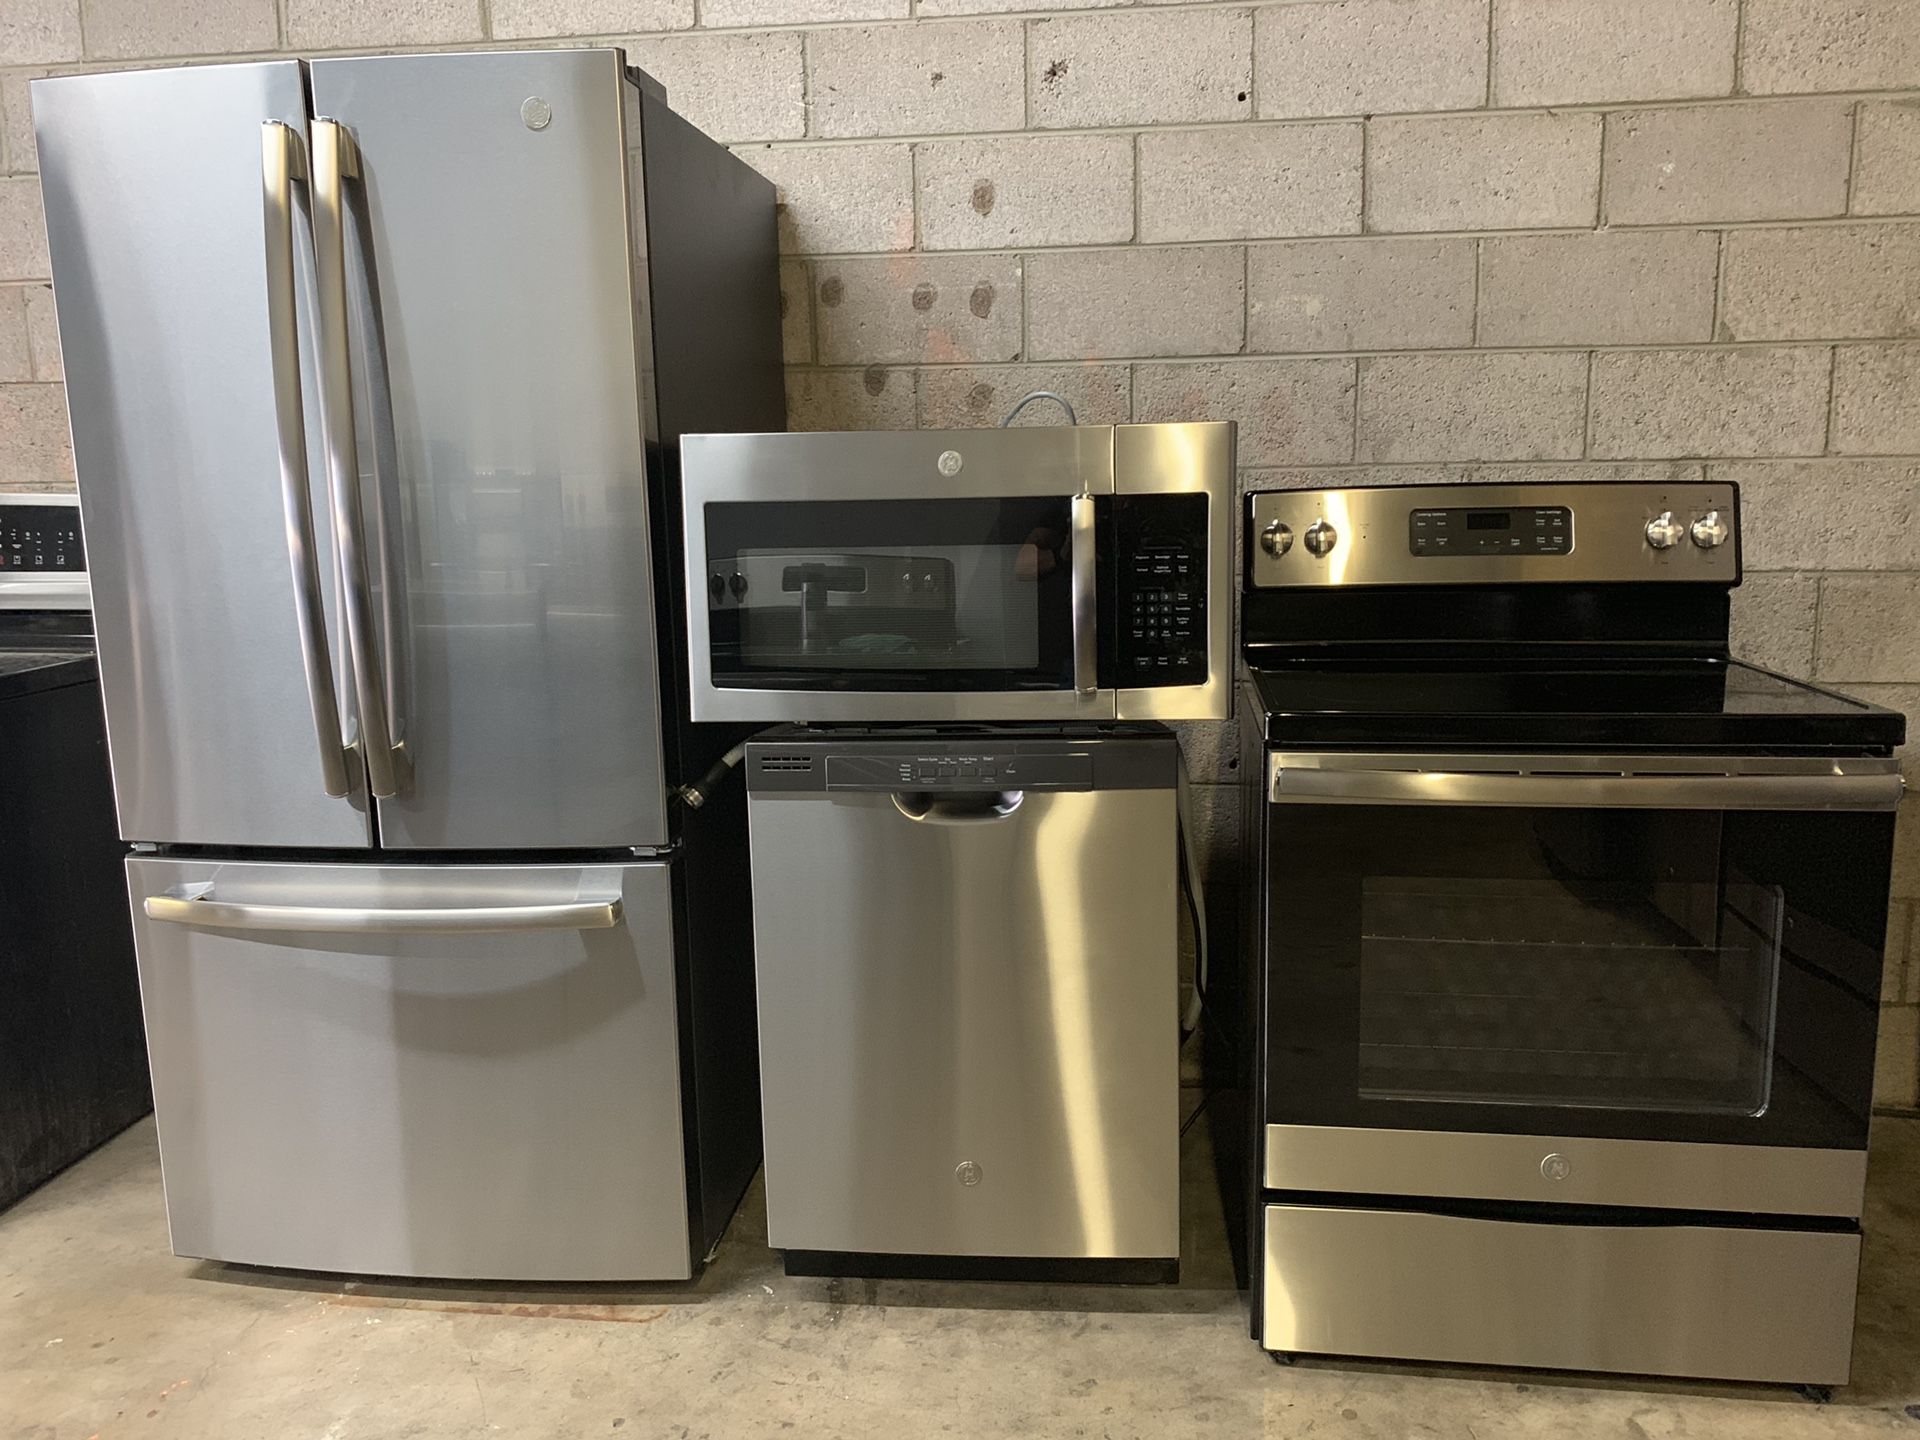 GE STAINLESS STEEL KITCHEN APPLIANCES SET EXCELLENT CONDITIONS